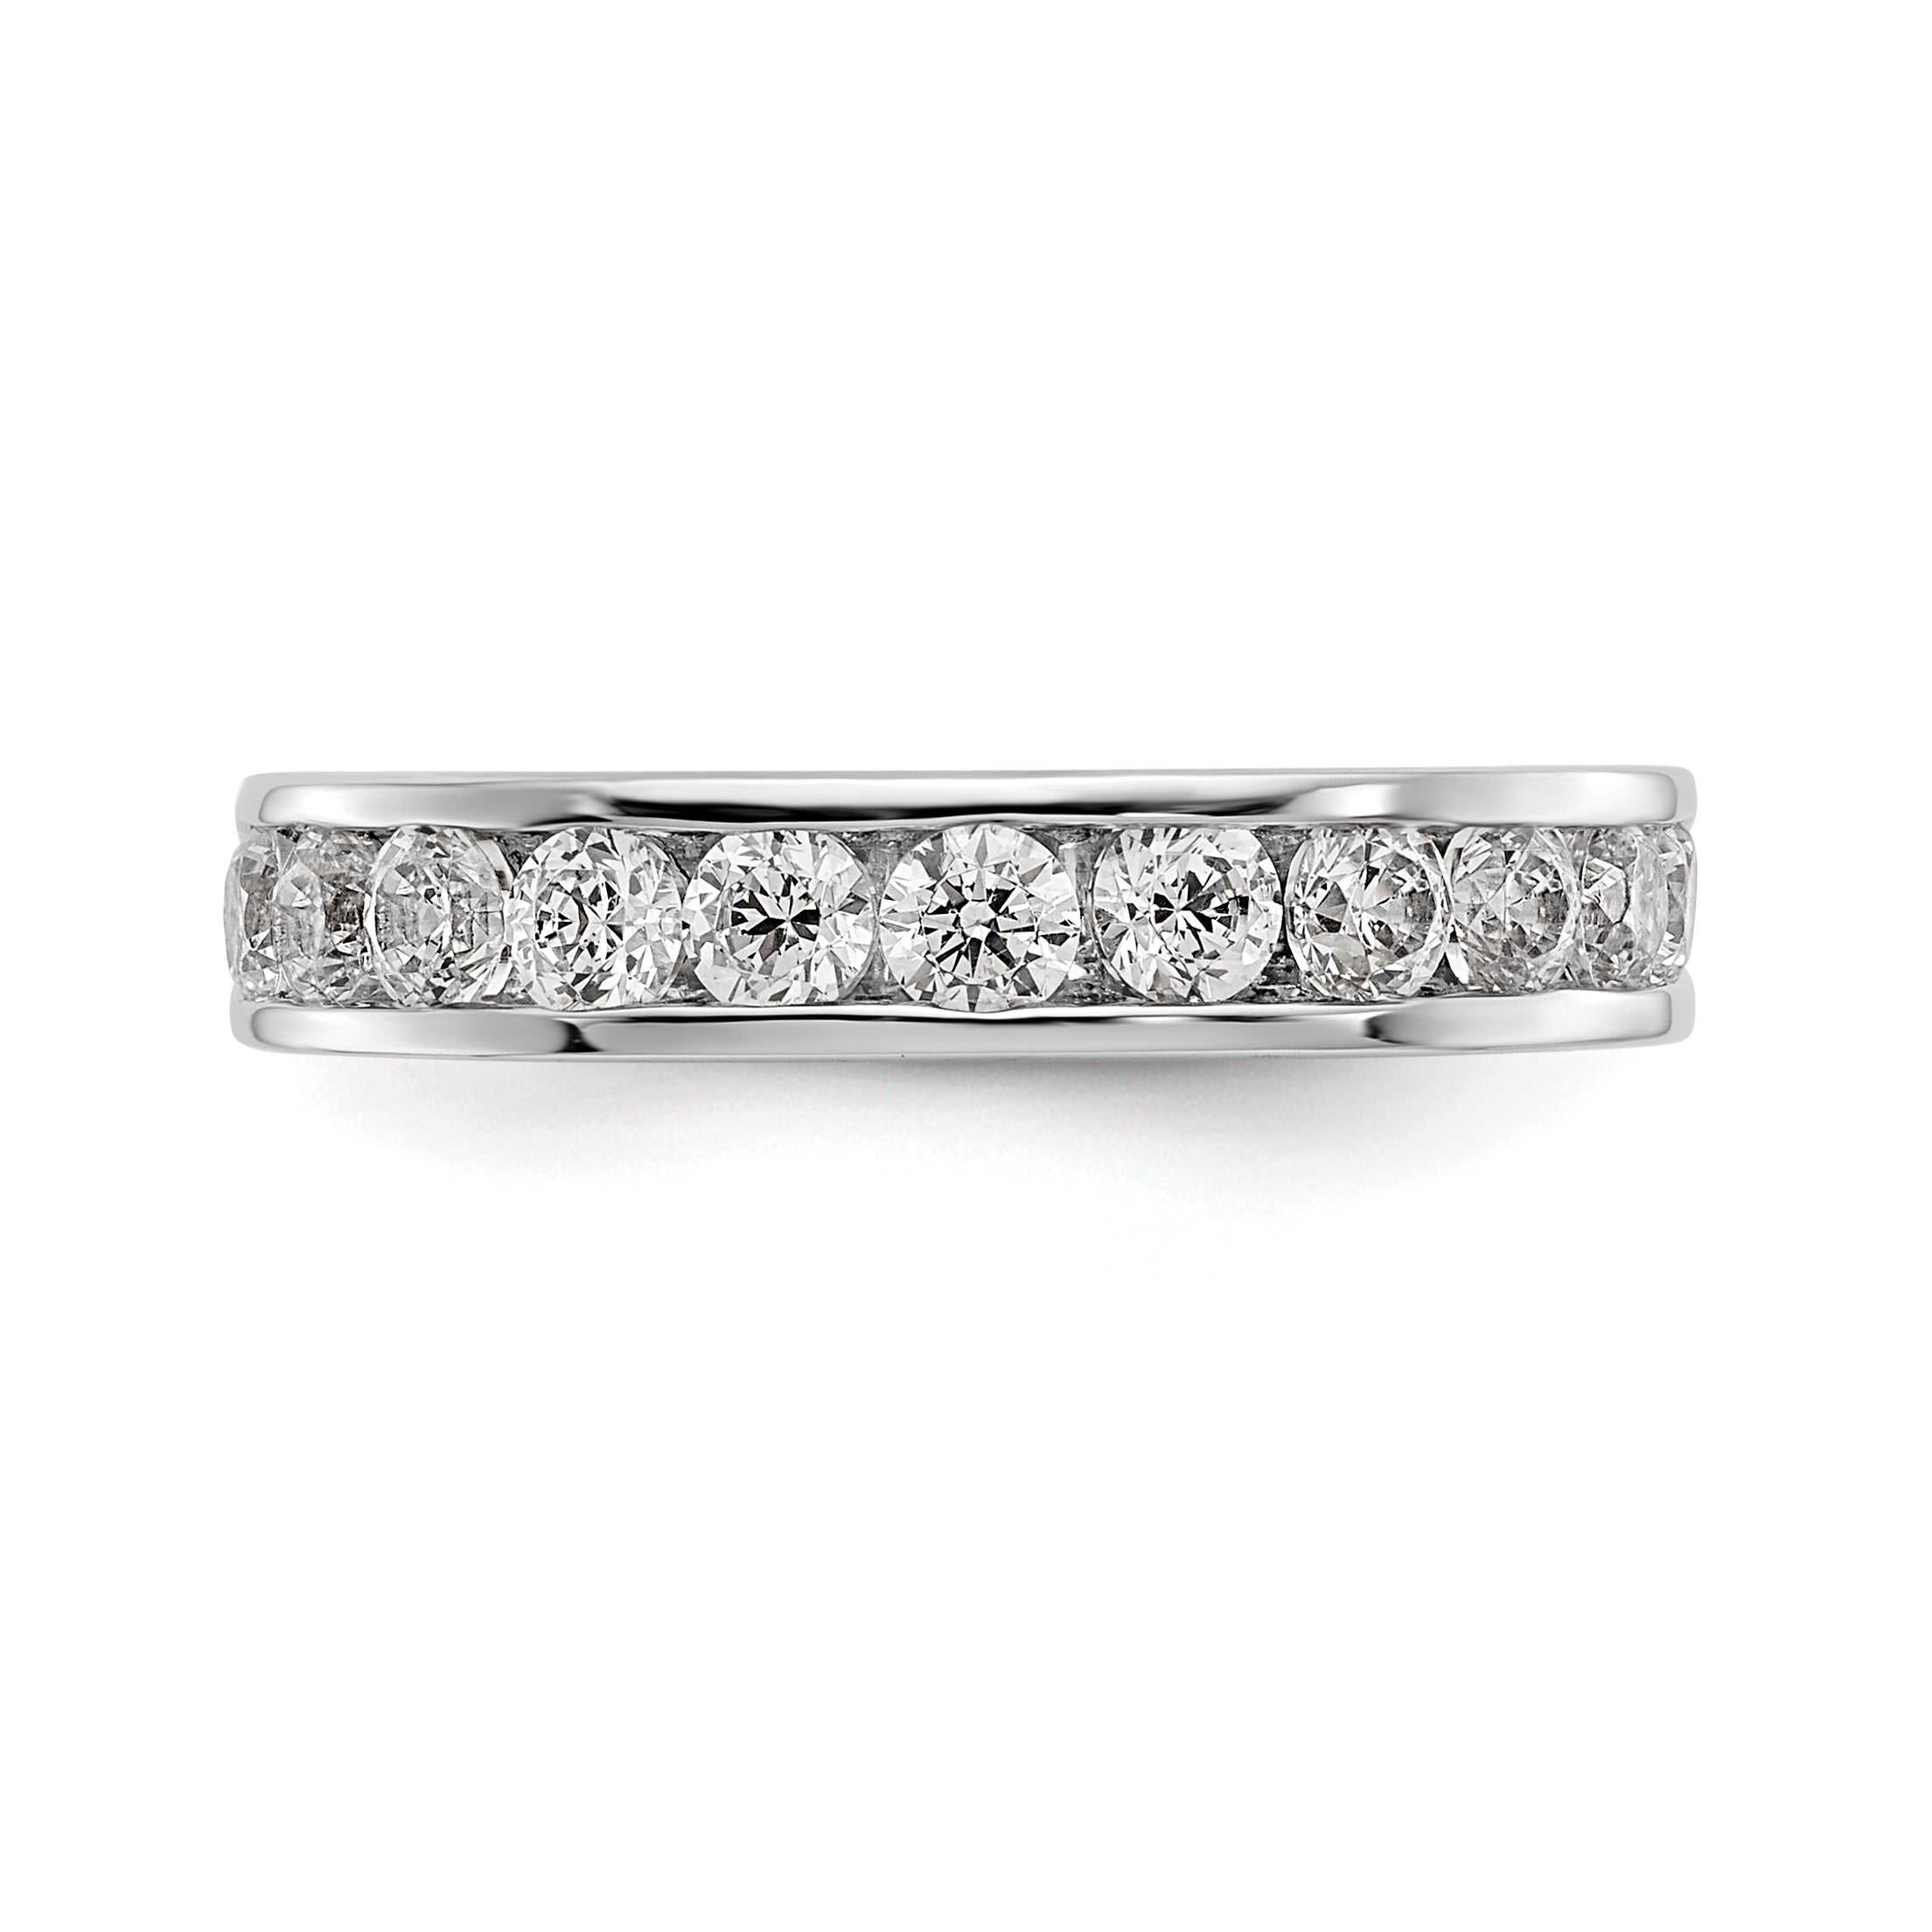 14K White Gold 11-Stone 1 carat Round Diamond Complete Channel Band